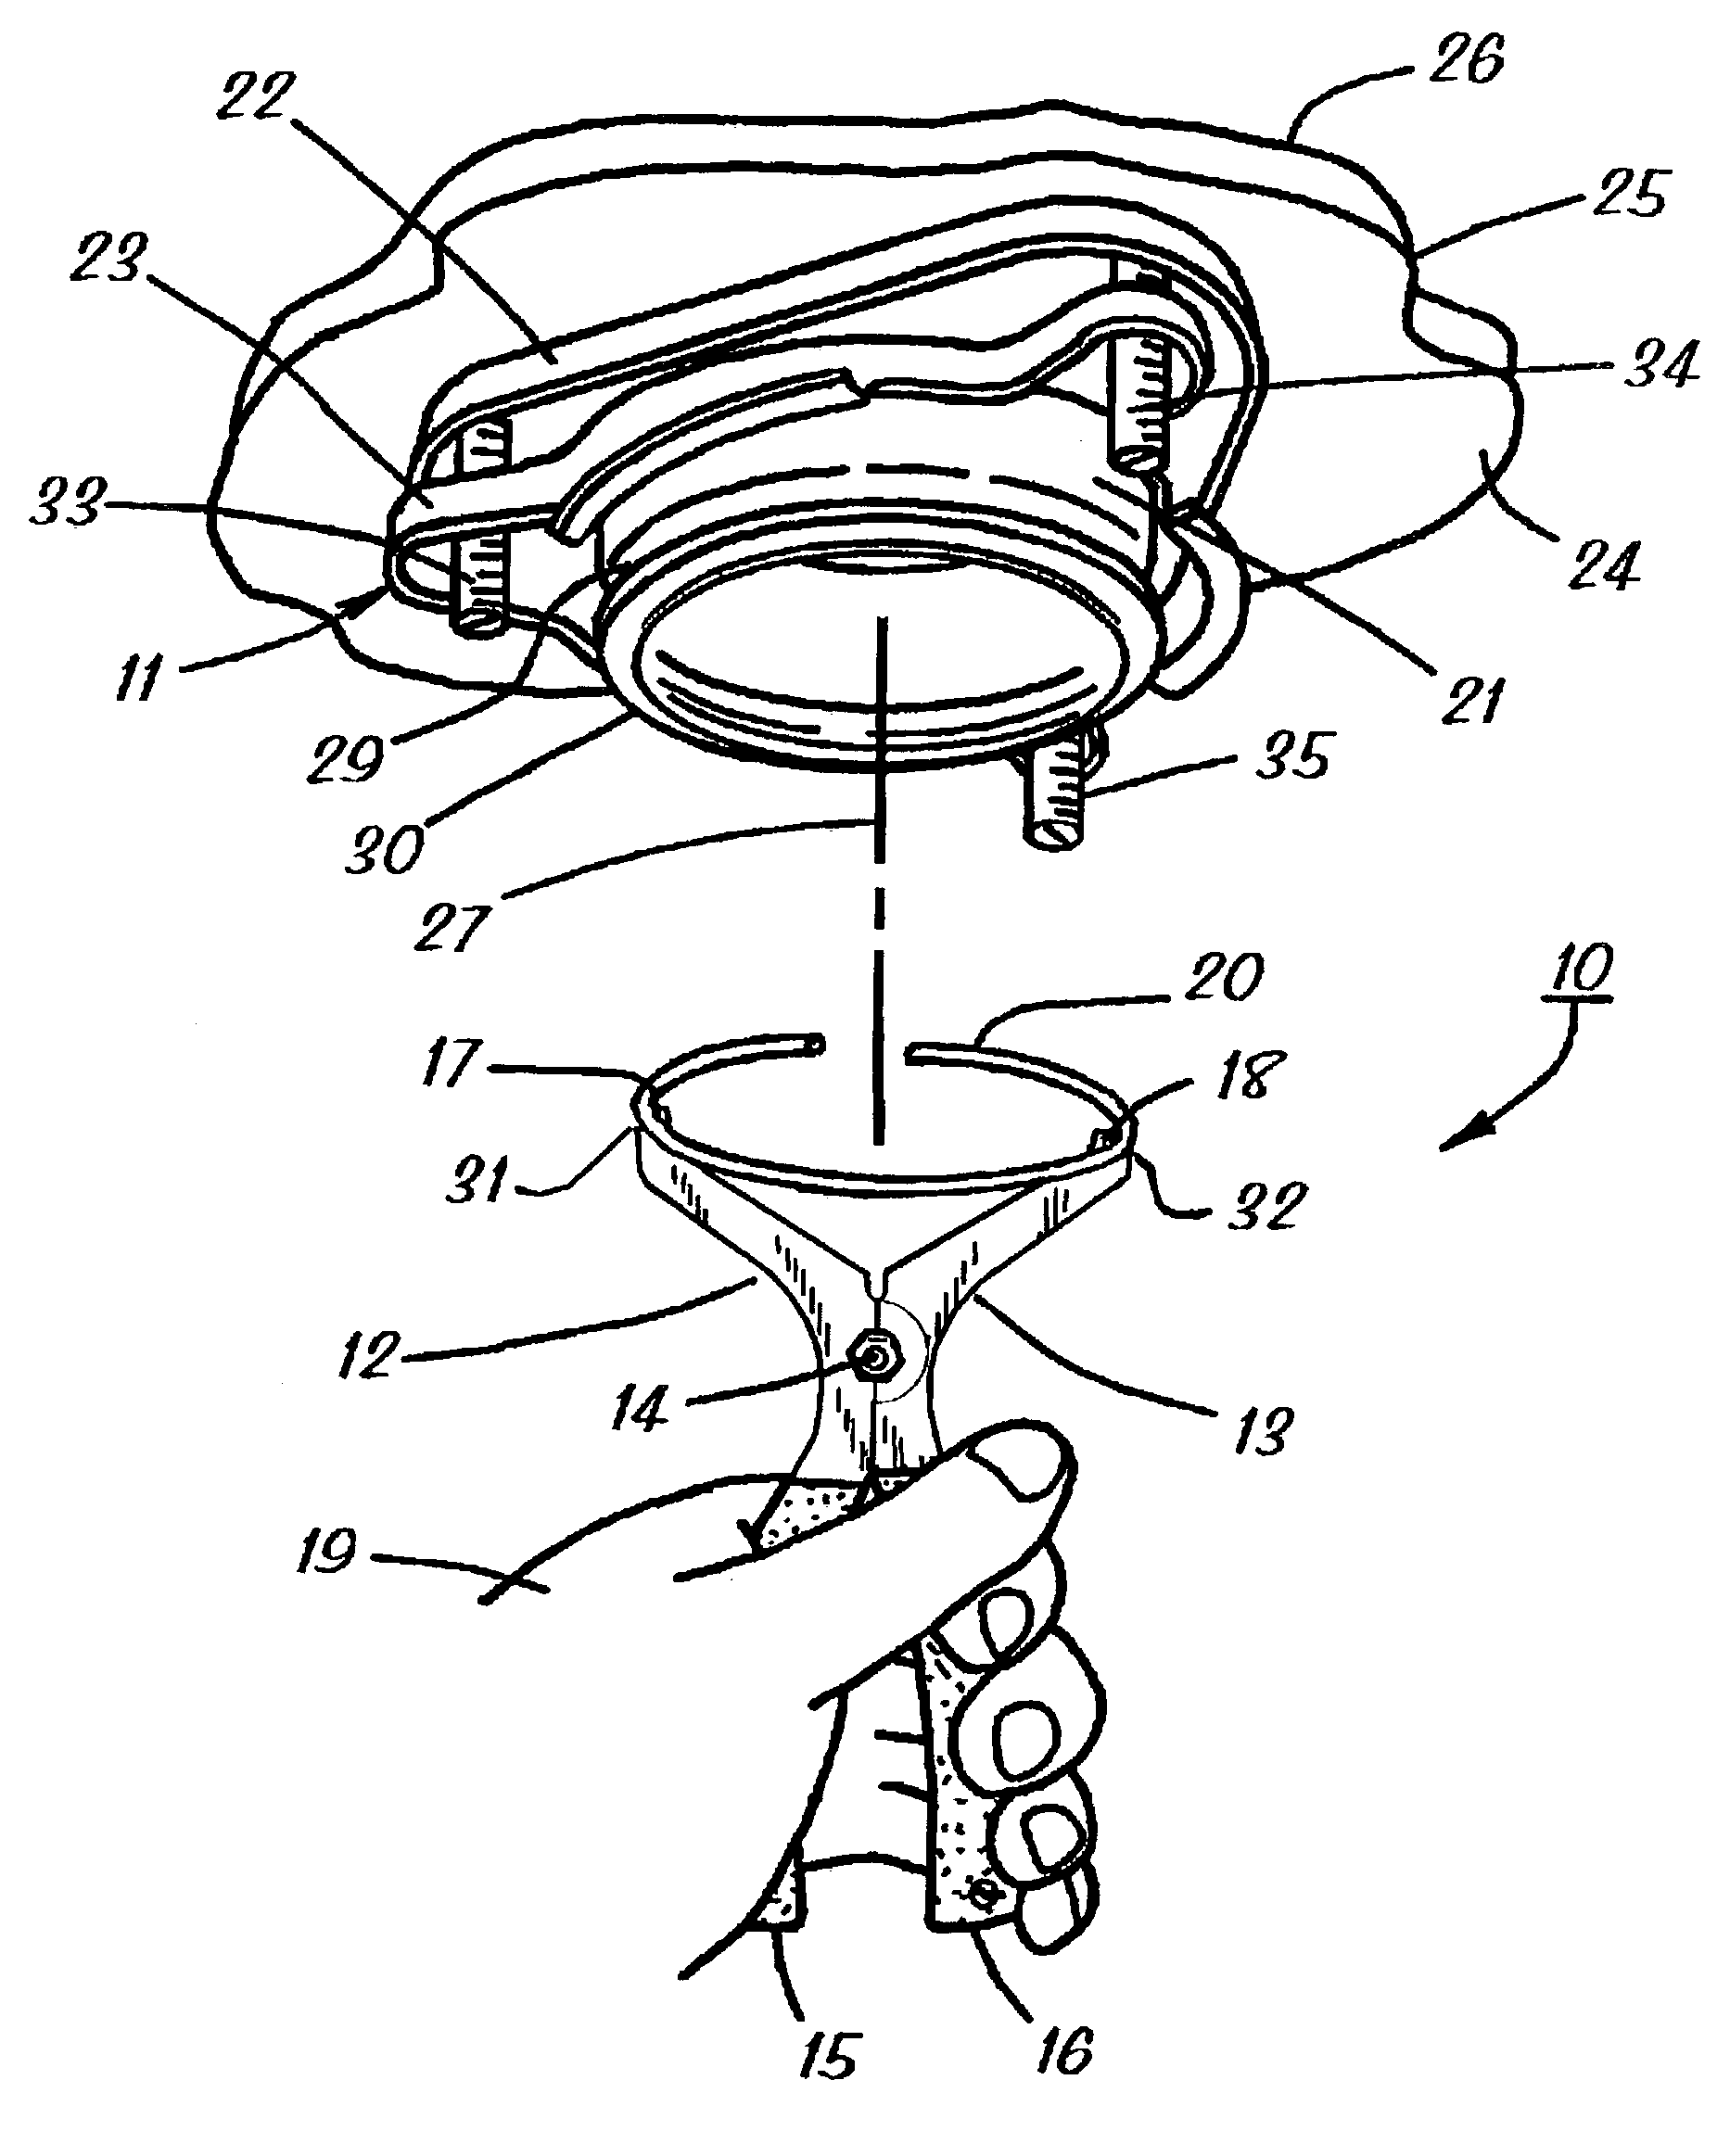 Sink flange assembly installation method and tool